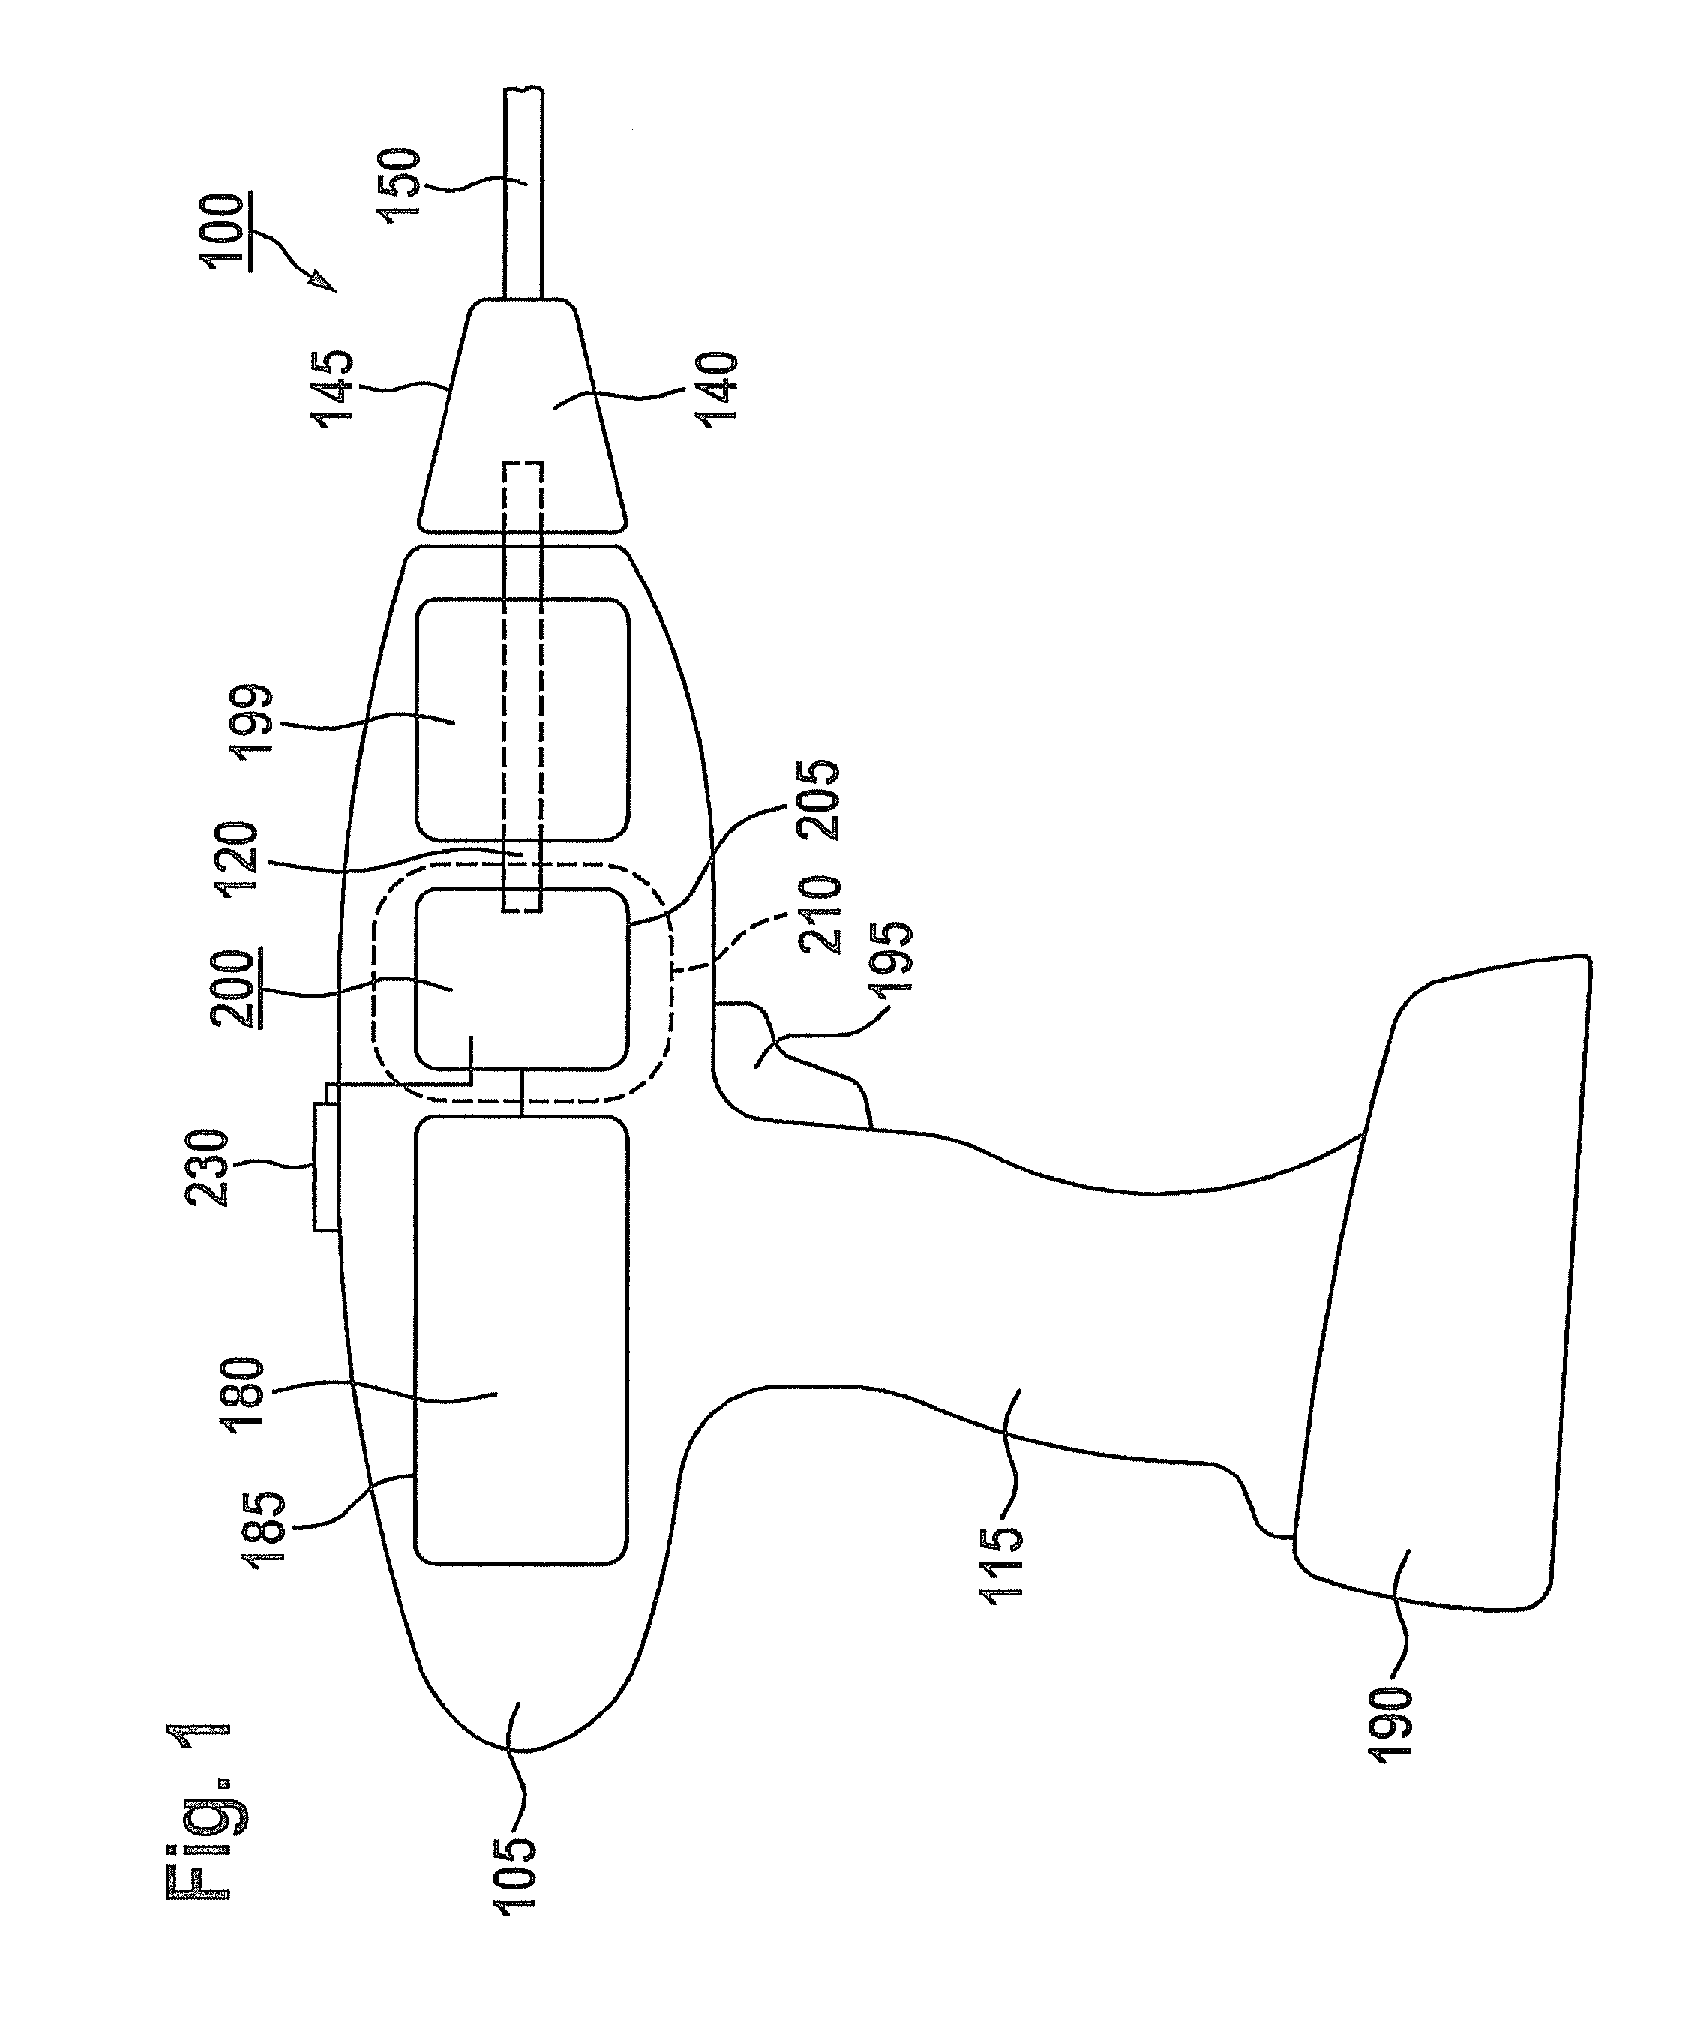 Hand-held power tool having a planetary gearbox